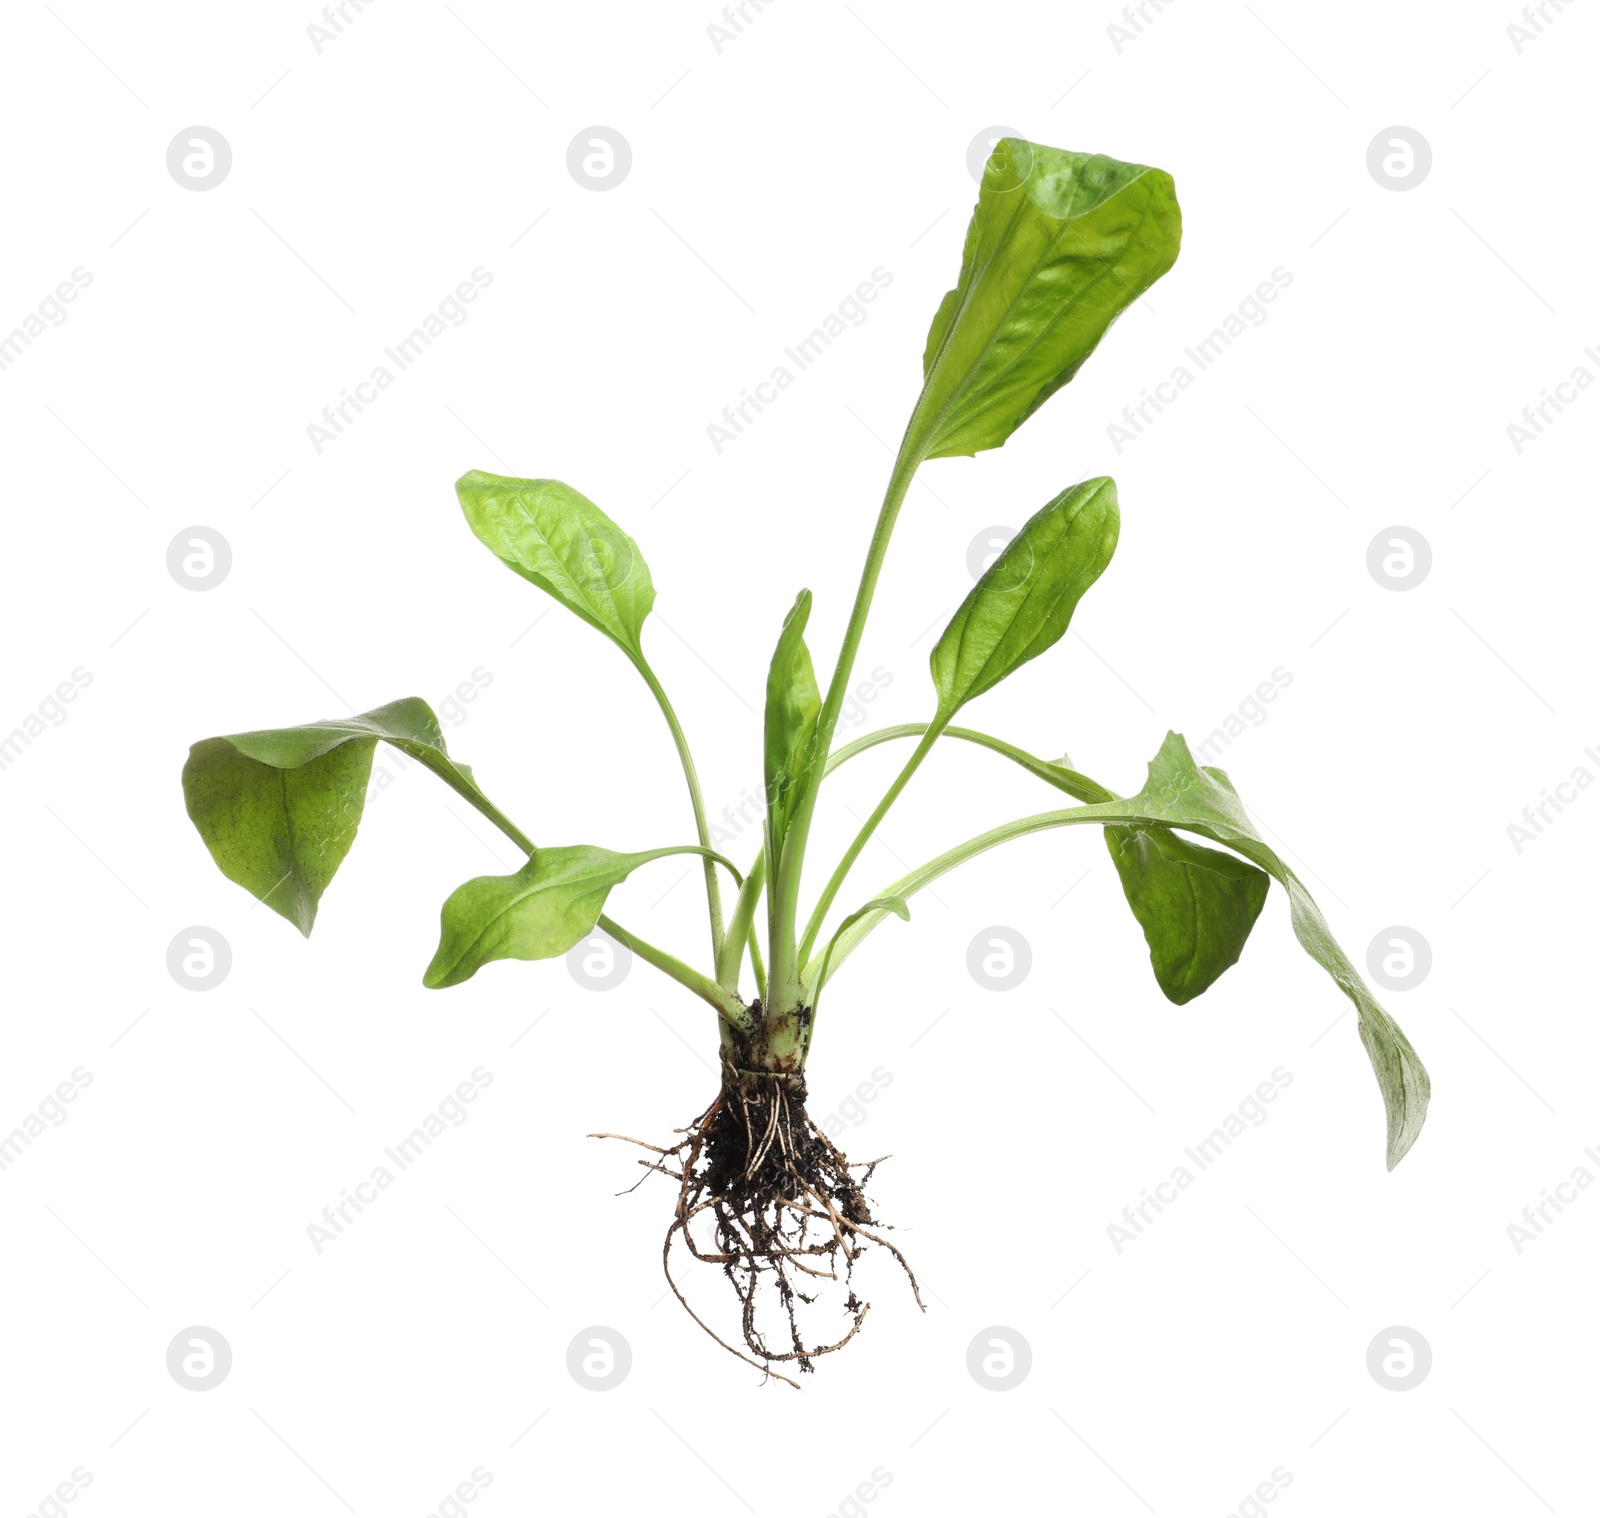 Photo of Green broadleaf plantain plant isolated on white